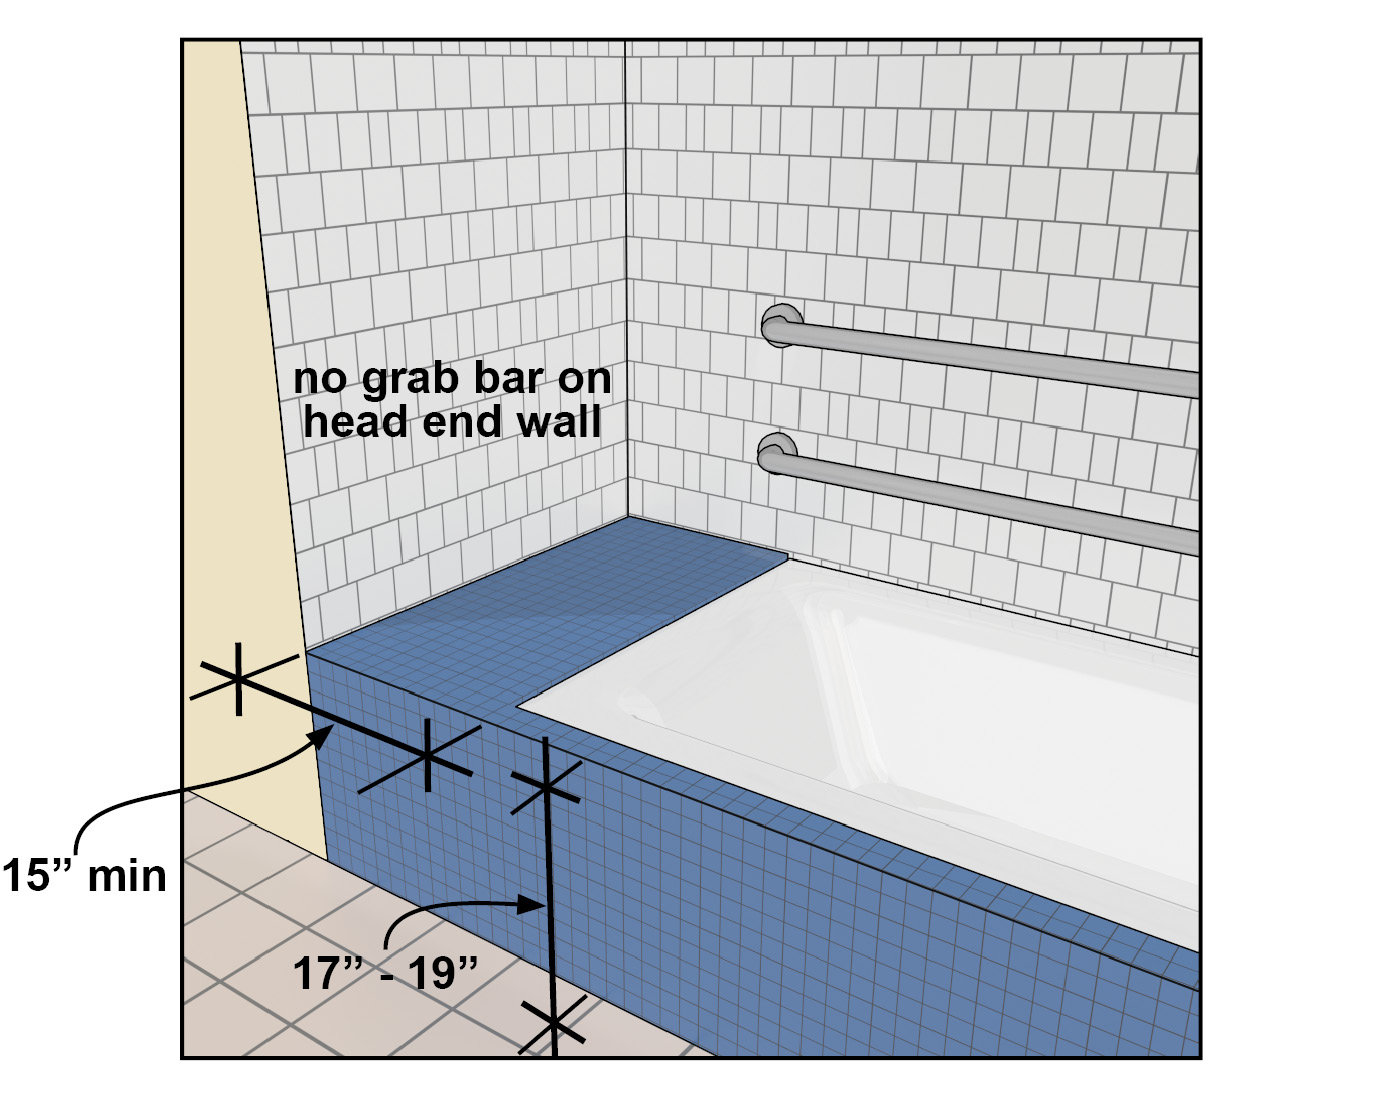 Chapter 6 Bathing Rooms, Bathtub Handrail Placement